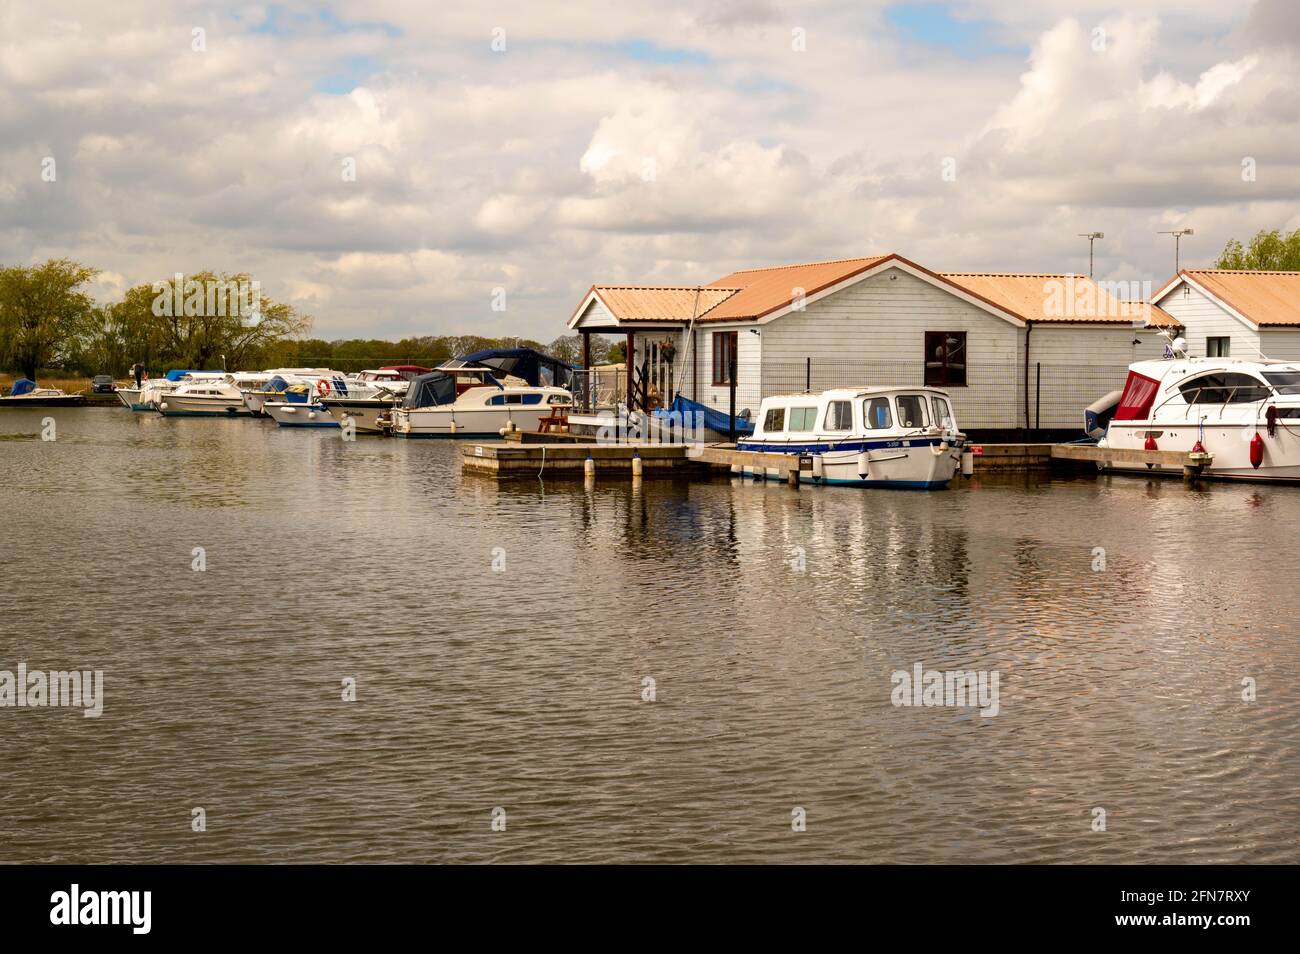 Potter Heigham River Thurne with pleasure boats on the river Stock Photo